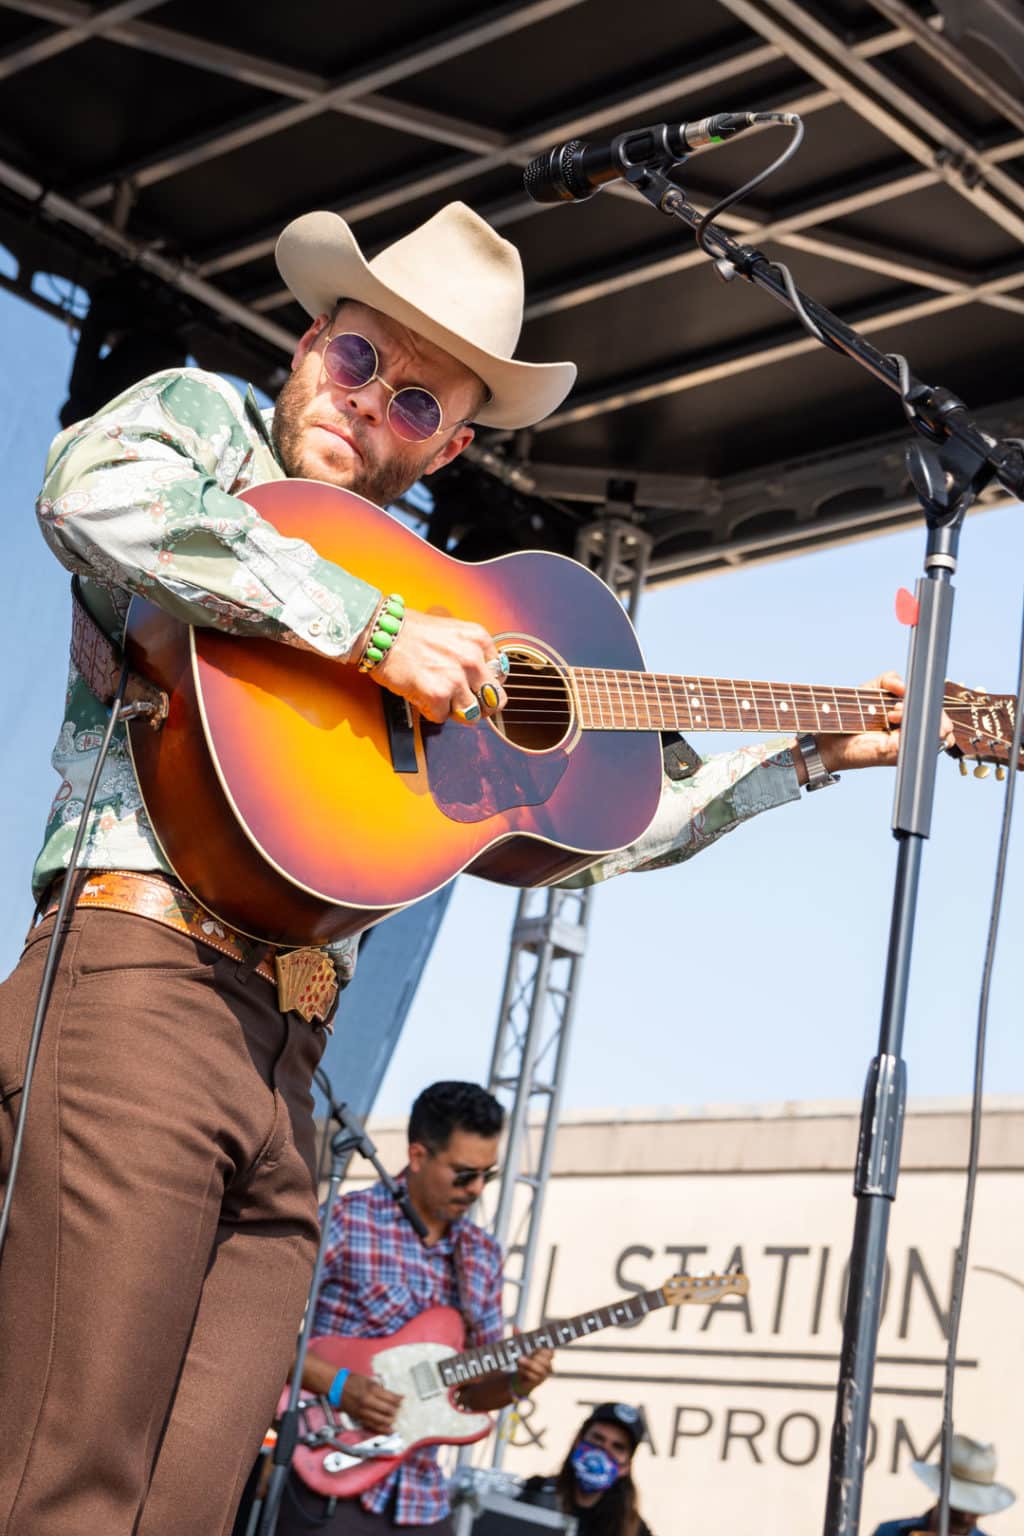 Medium shot of Charlie Crockett holding his acoustic guitar high up as he picks it. He is wearing a cowboy hat, round sunglasses, colorful jewelry, and a belt with white horses on it and a card hand belt buckle.